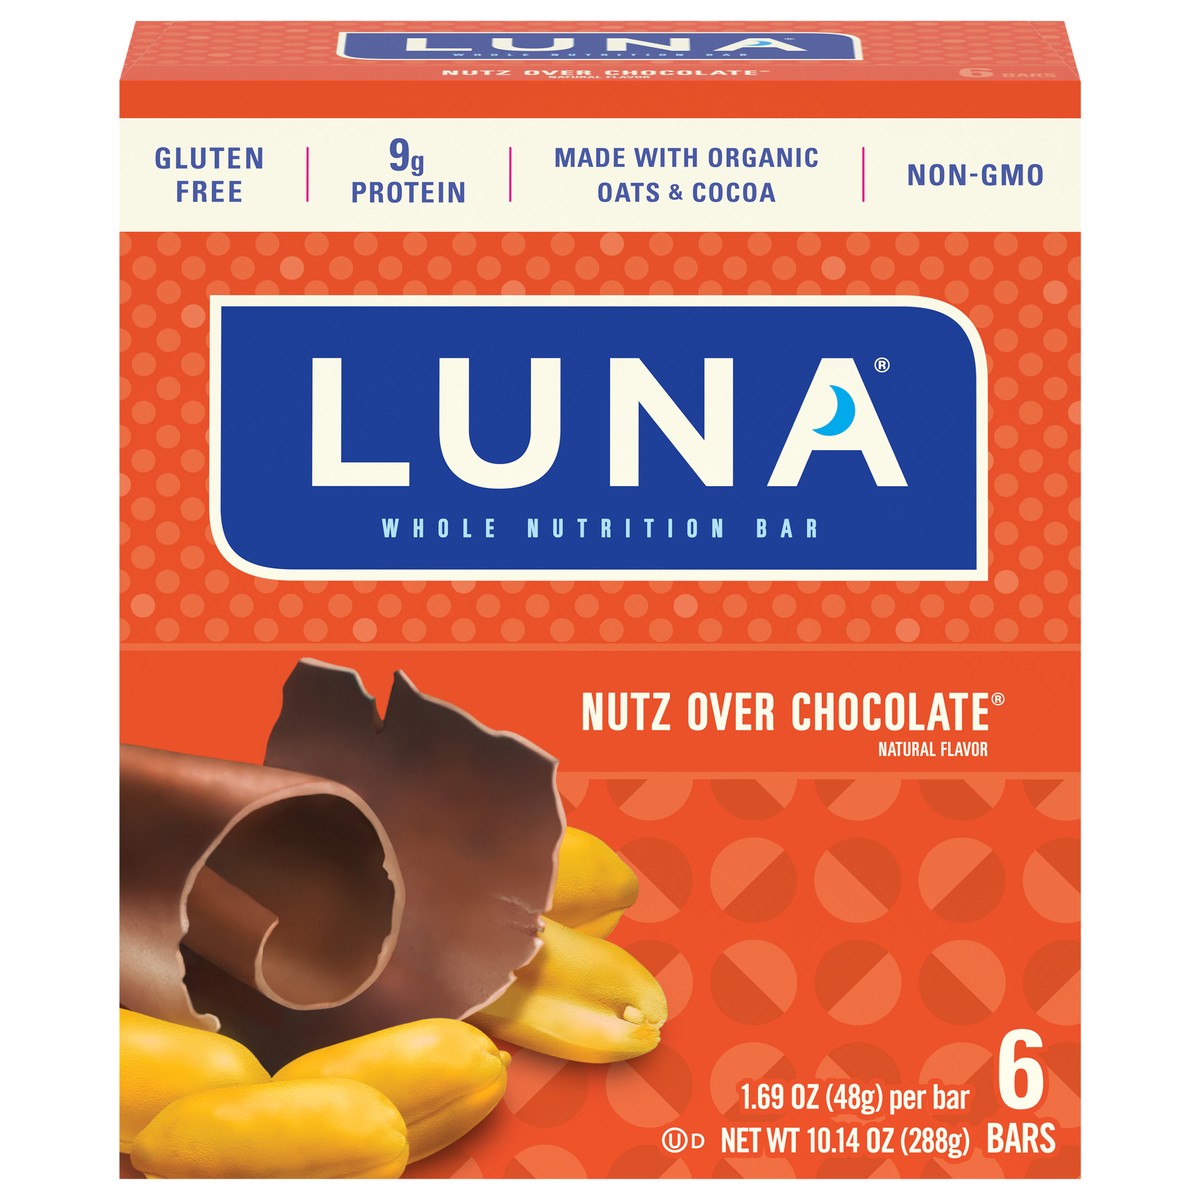 slide 1 of 9, LUNA Bar - Nutz Over Chocolate Flavor - Gluten-Free - Non-GMO - 7-9g Protein - Made with Organic Oats - Low Glycemic - Whole Nutrition Snack Bars - 1.69 oz. (6 Pack), 10.14 oz; 6 ct